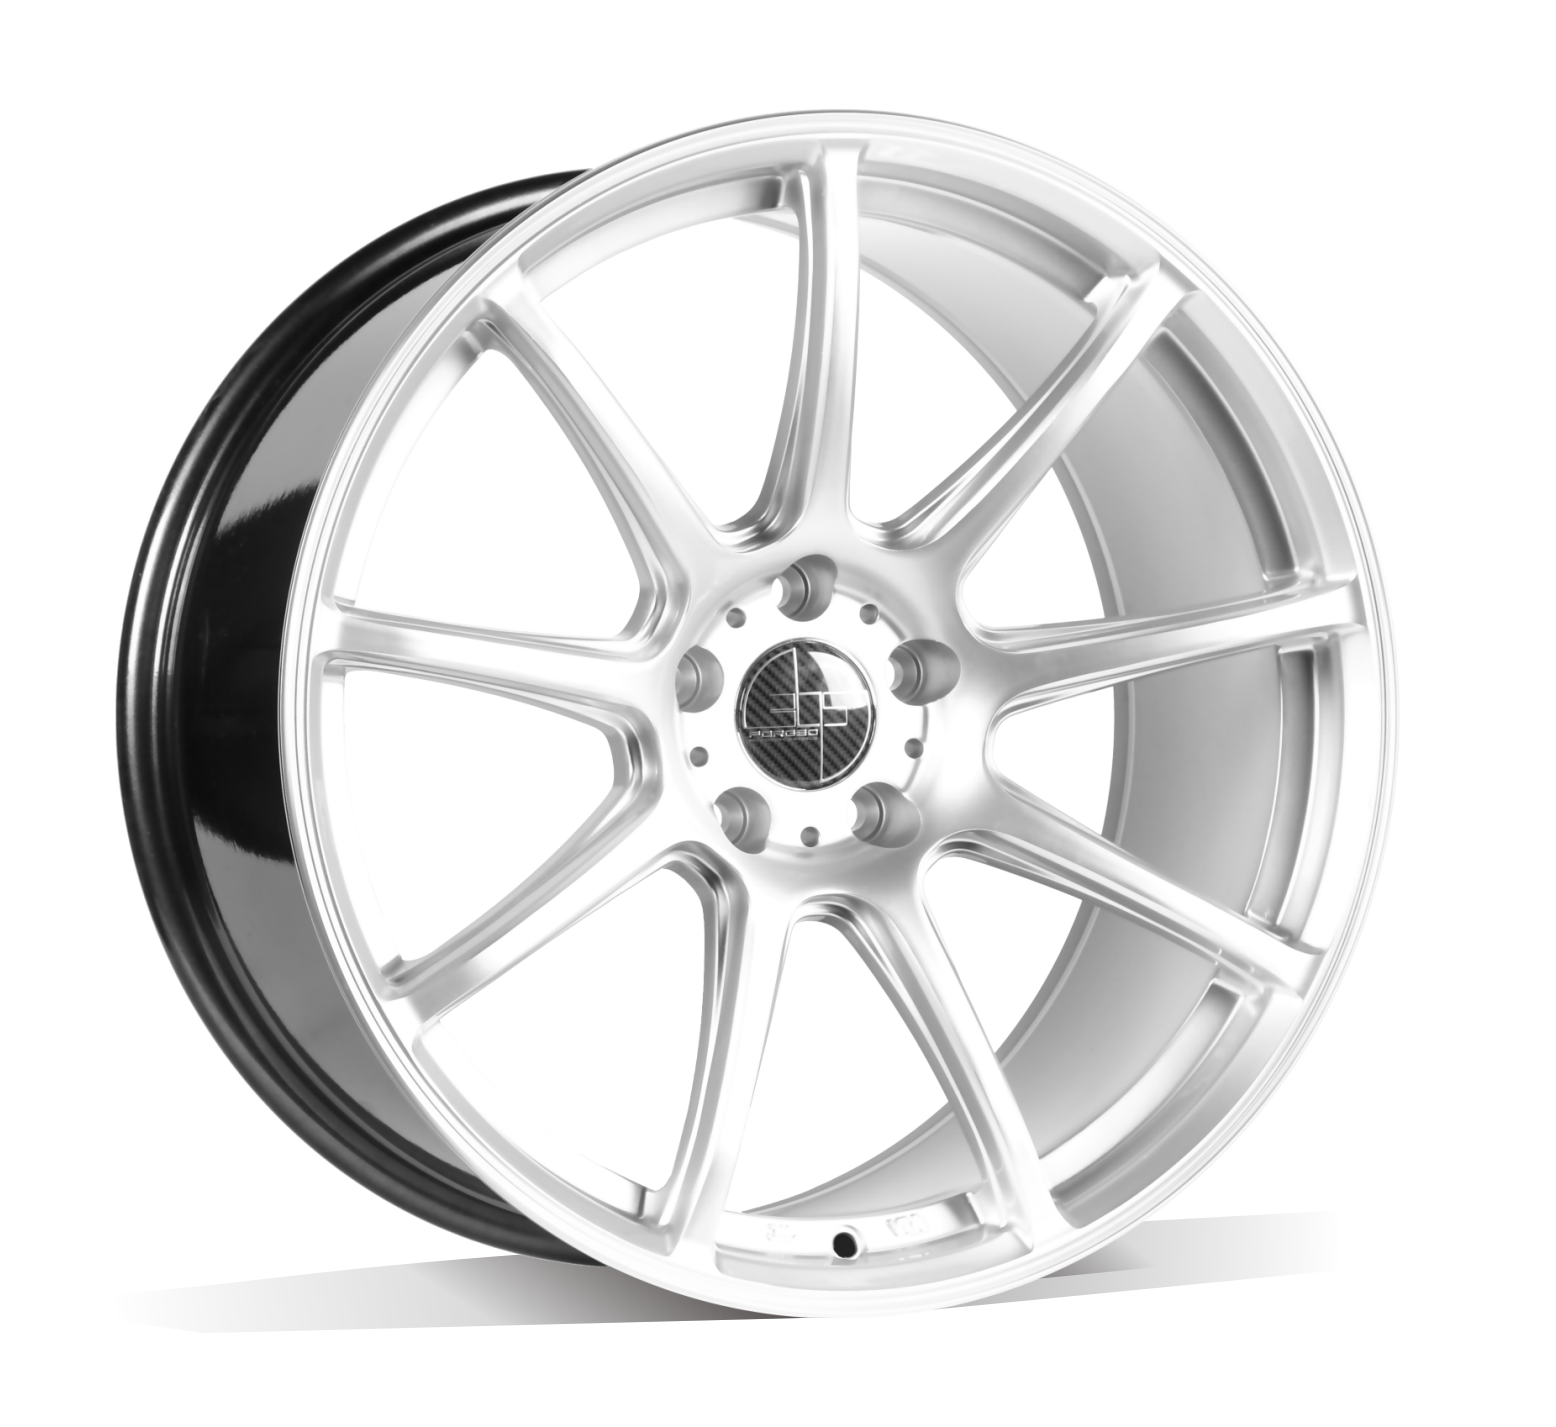 305 Forged FT108 forged wheels